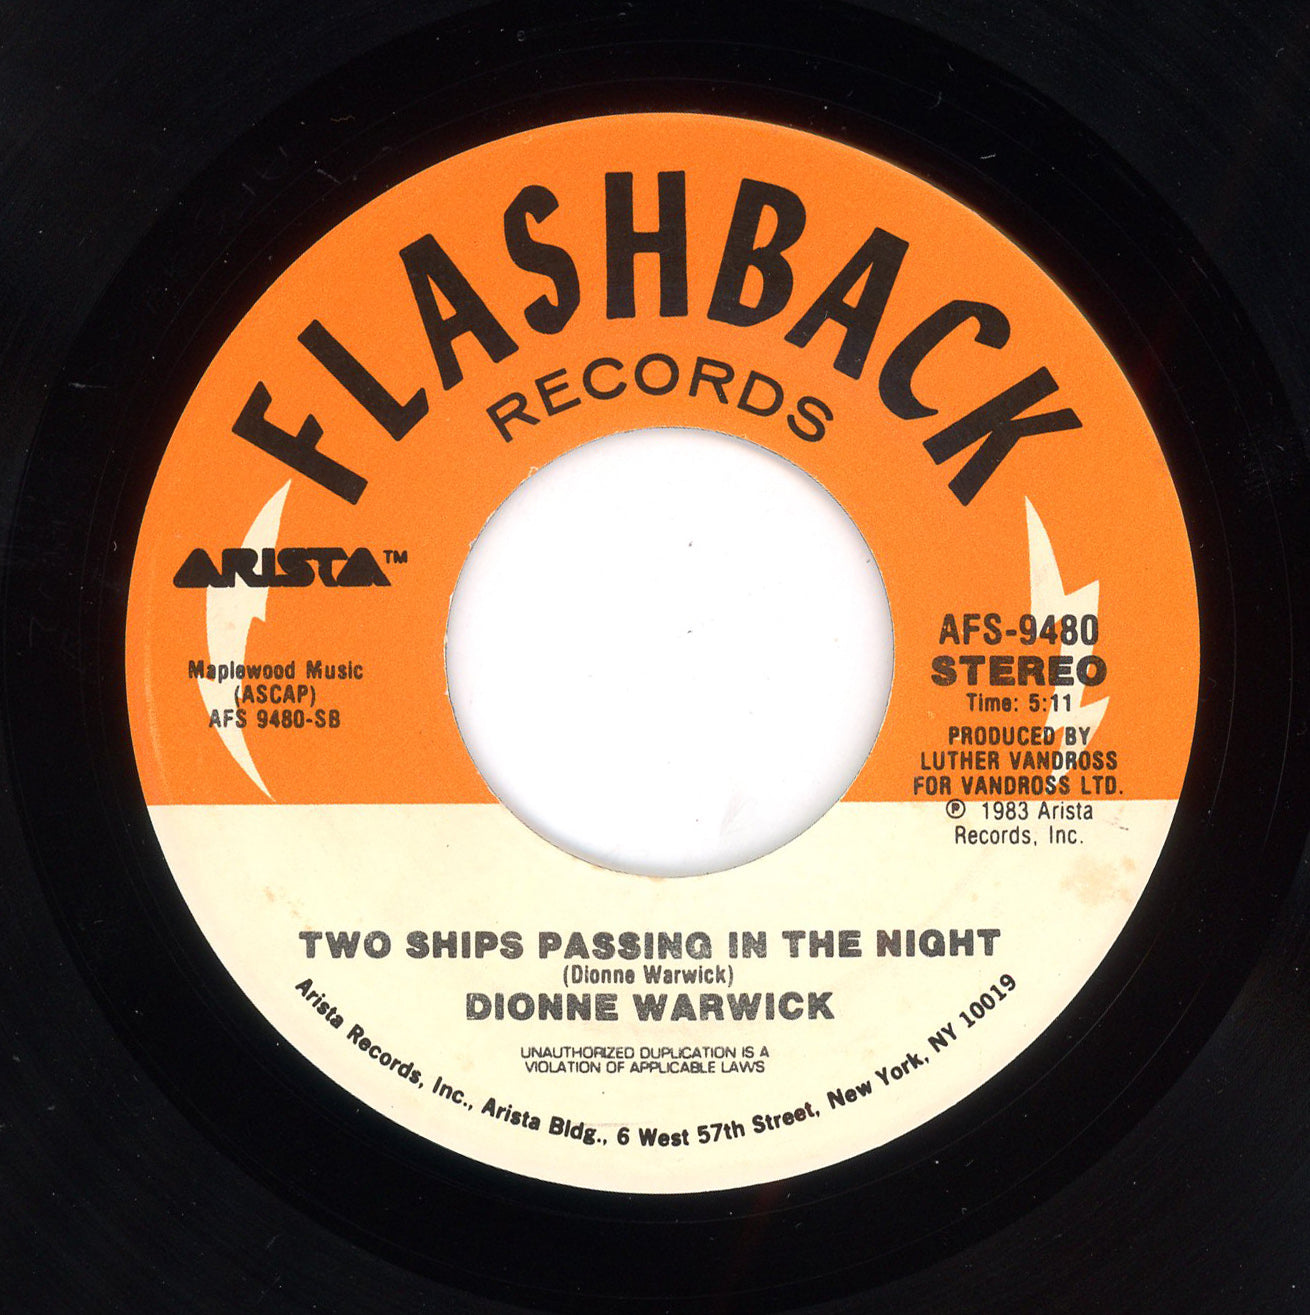 Dionne & Friends, Elton John, Gladys Knight & Stevie Wonder - That's What Friends Are For / Two Ships Passing In The Night 7"